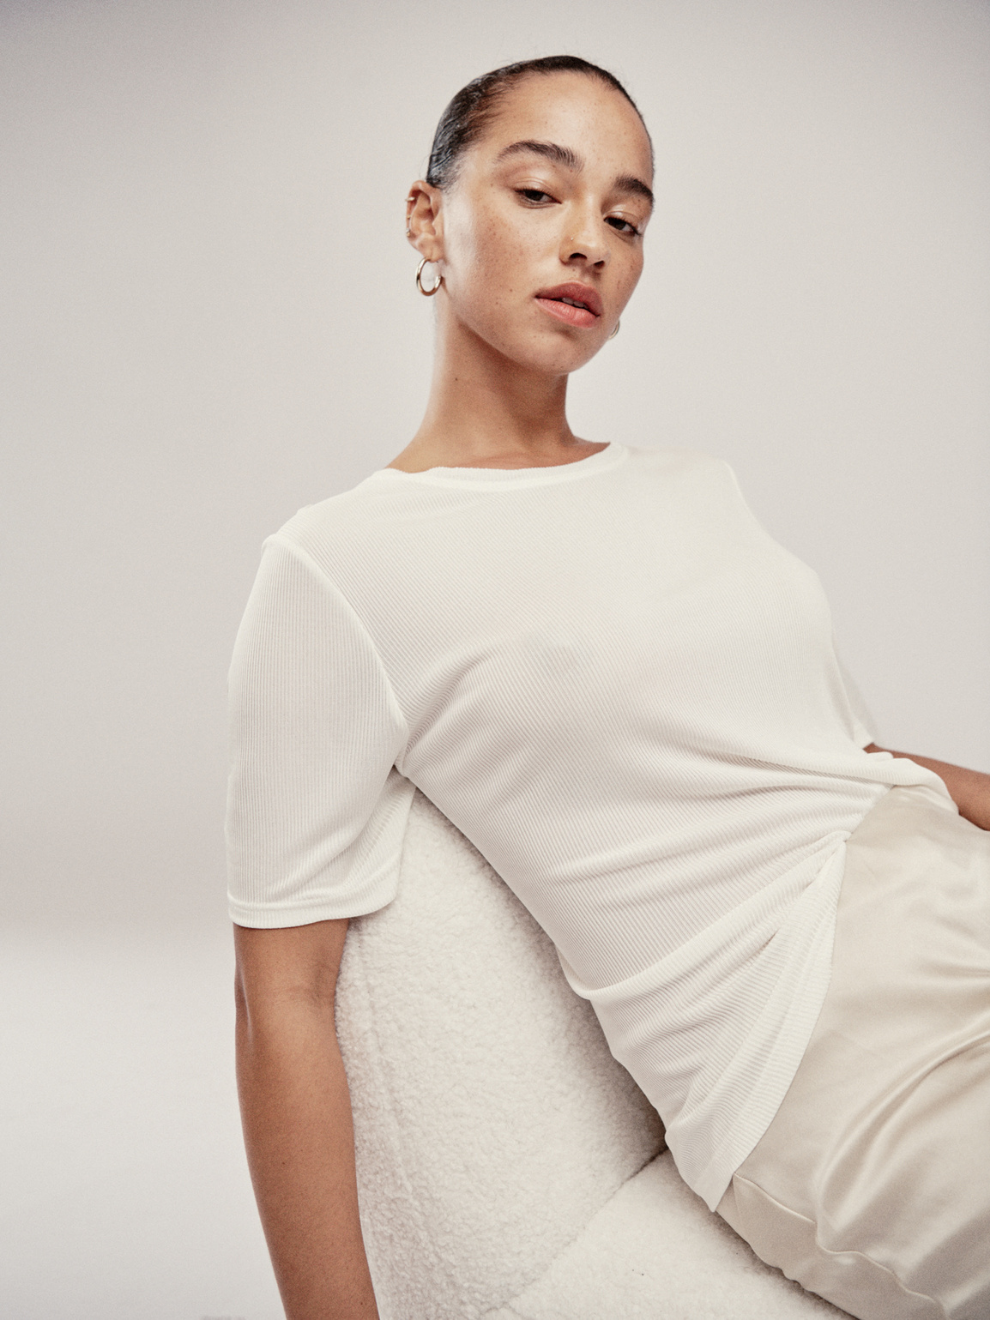 Silk White Ribbed T-shirt by Silk Laundry styled with Bias cut pants in Hazelnut.